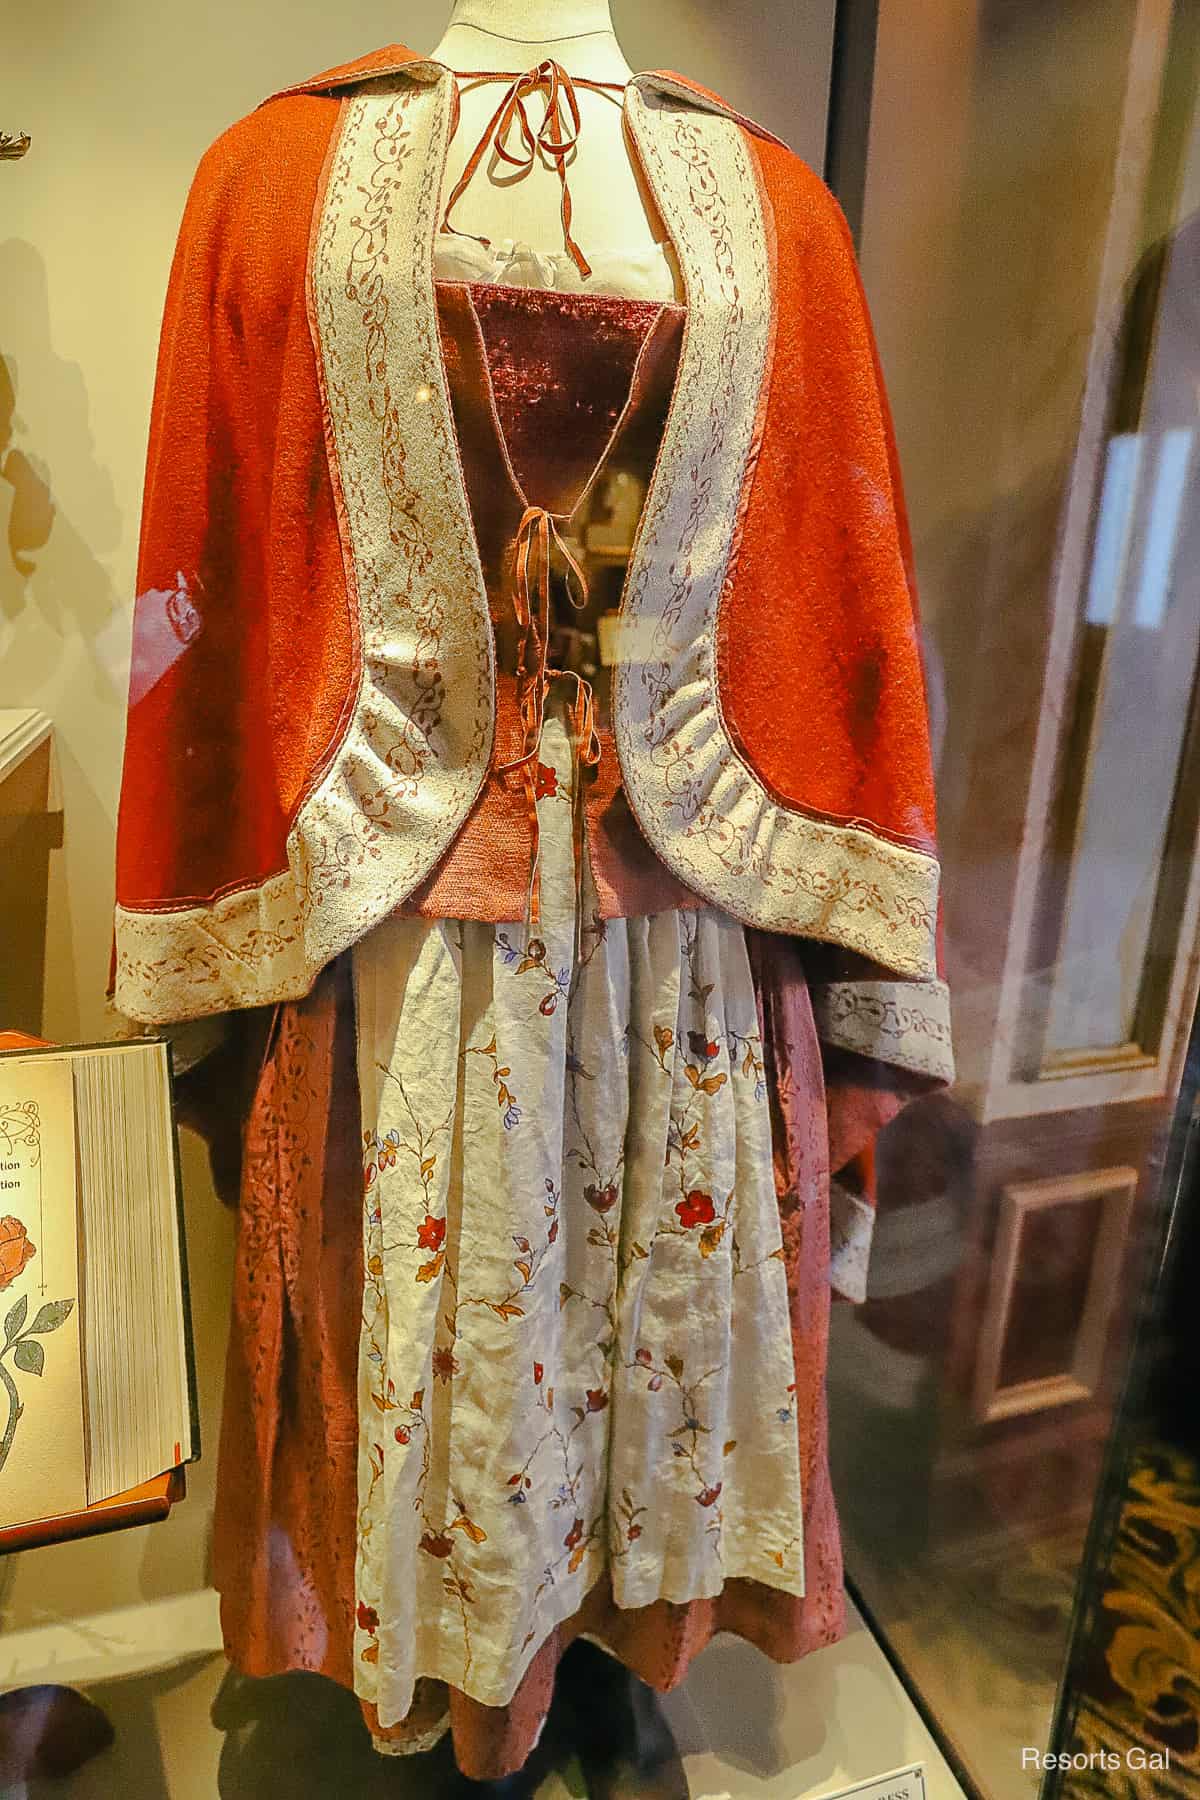 Belle's red dress and cape from the live-action Beauty and the Beast